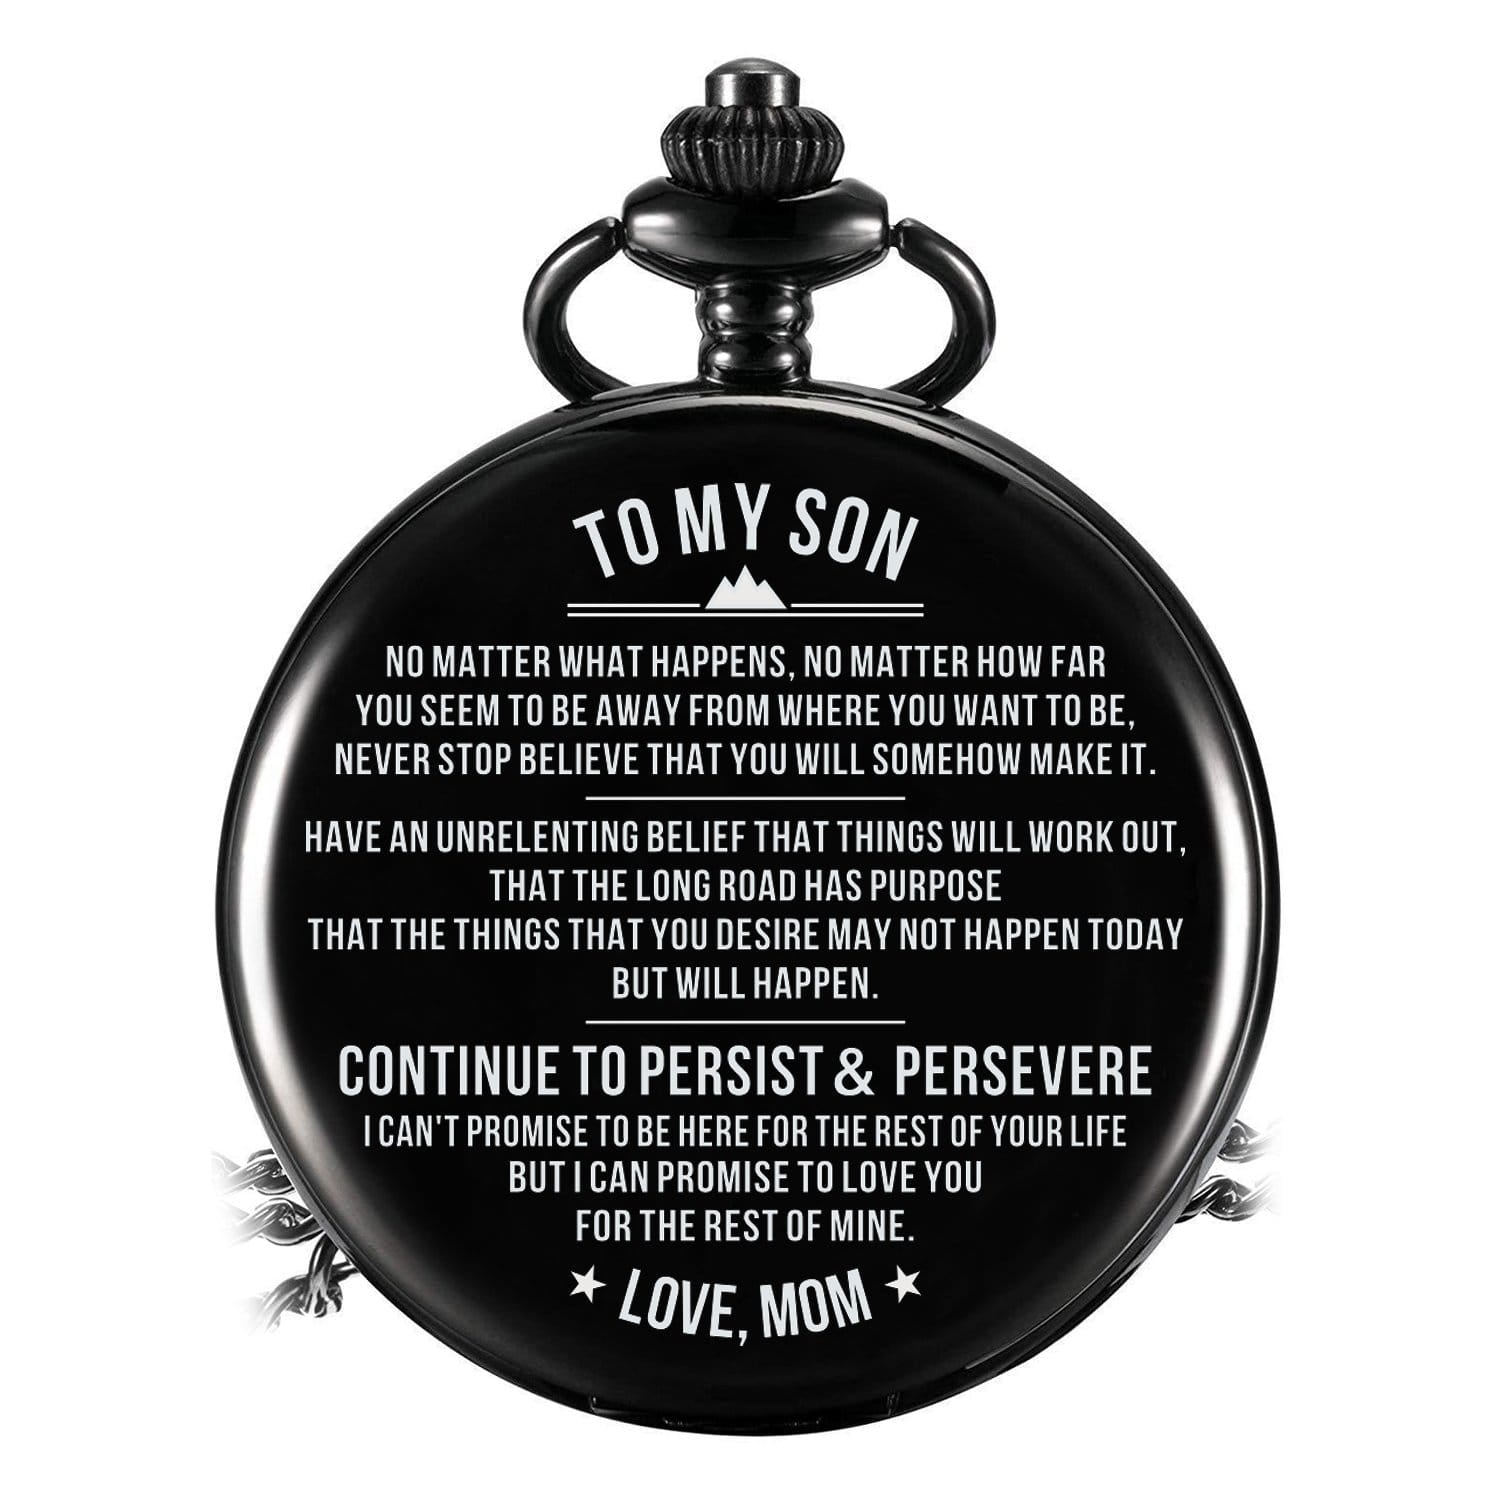 Pocket Watches Mom To Son - Continue To Persist And Persevere Pocket Watch GiveMe-Gifts